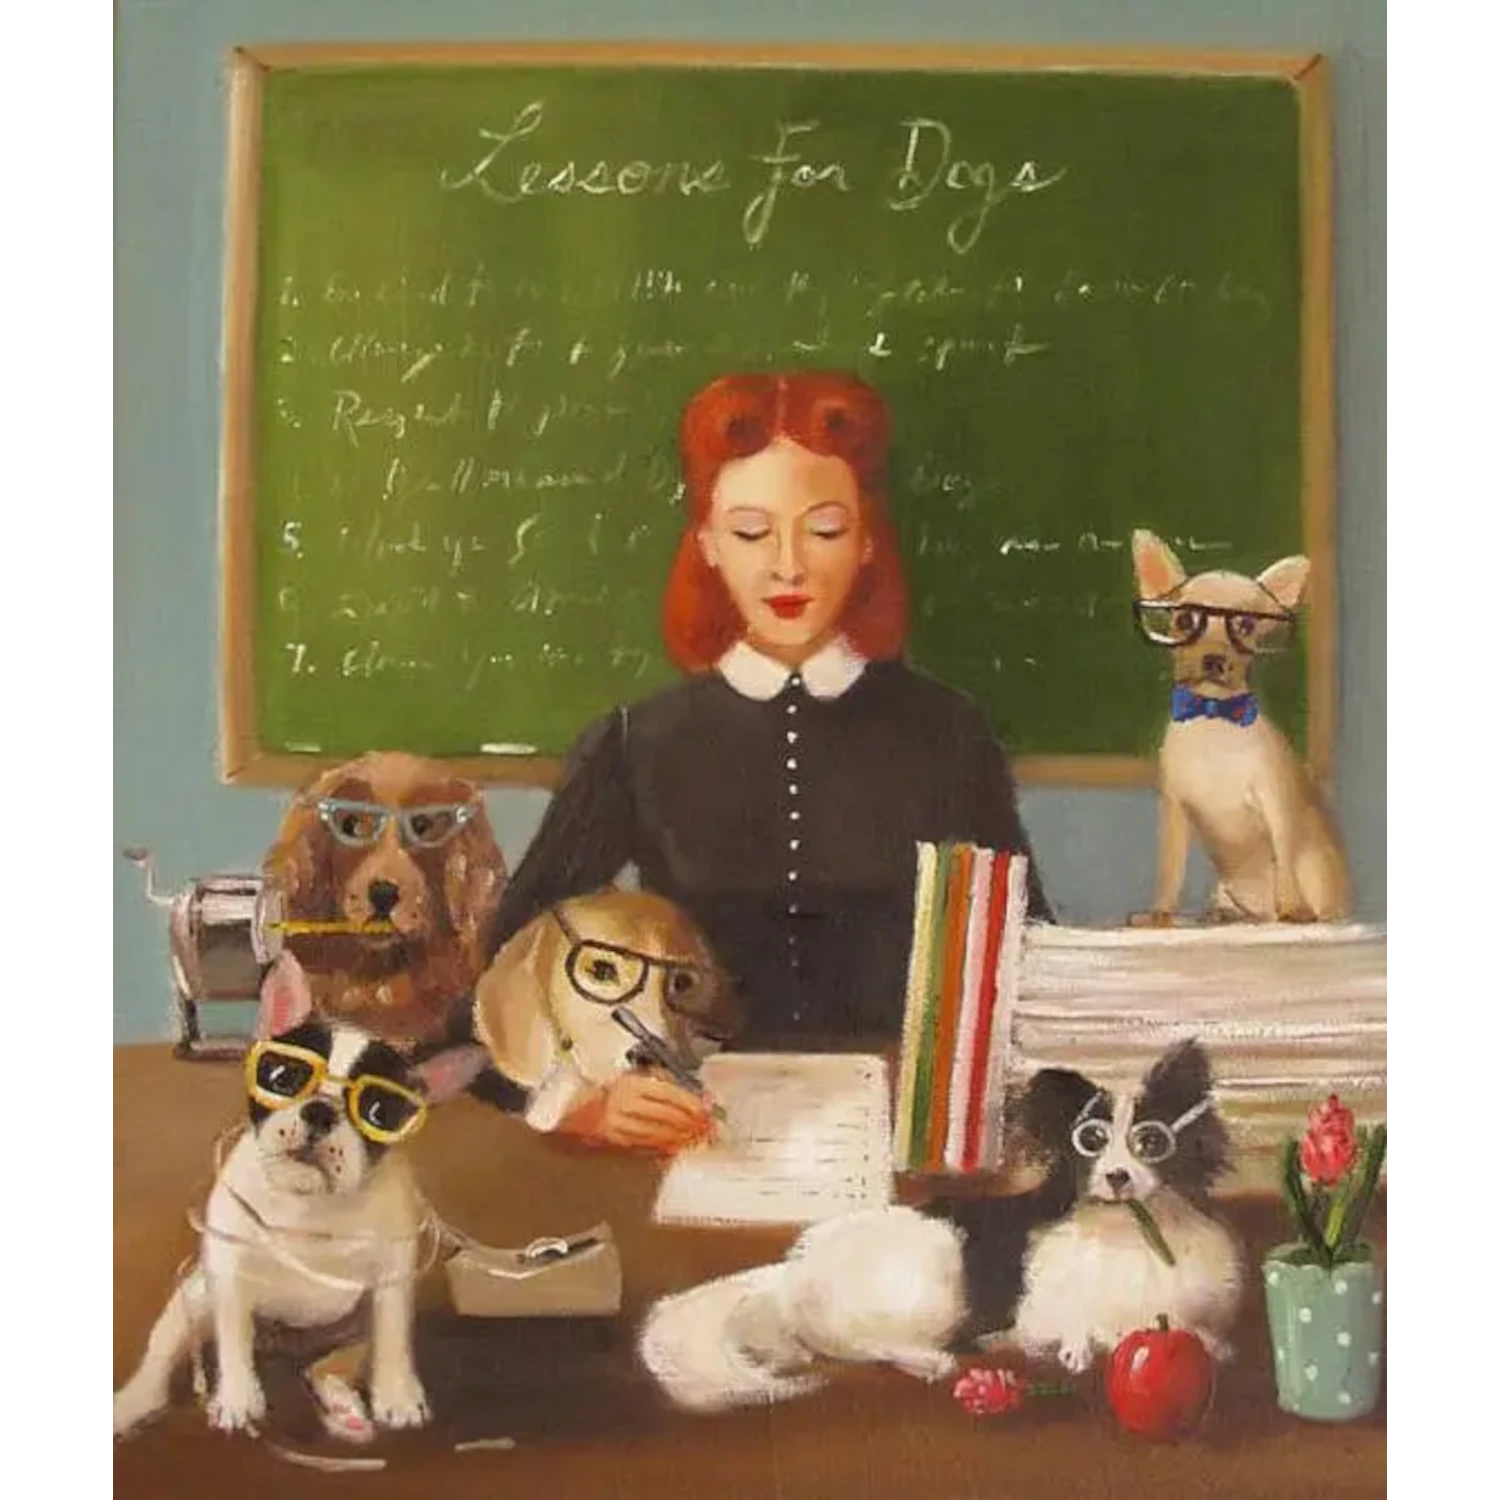 A whimsical painting by Janet Hill depicting a woman teaching a class of dogs wearing glasses, with a chalkboard titled &quot;lessons for dogs&quot; in the background, available as a Miss Moon Lesson Seven Small Art Print by Janet Hill.